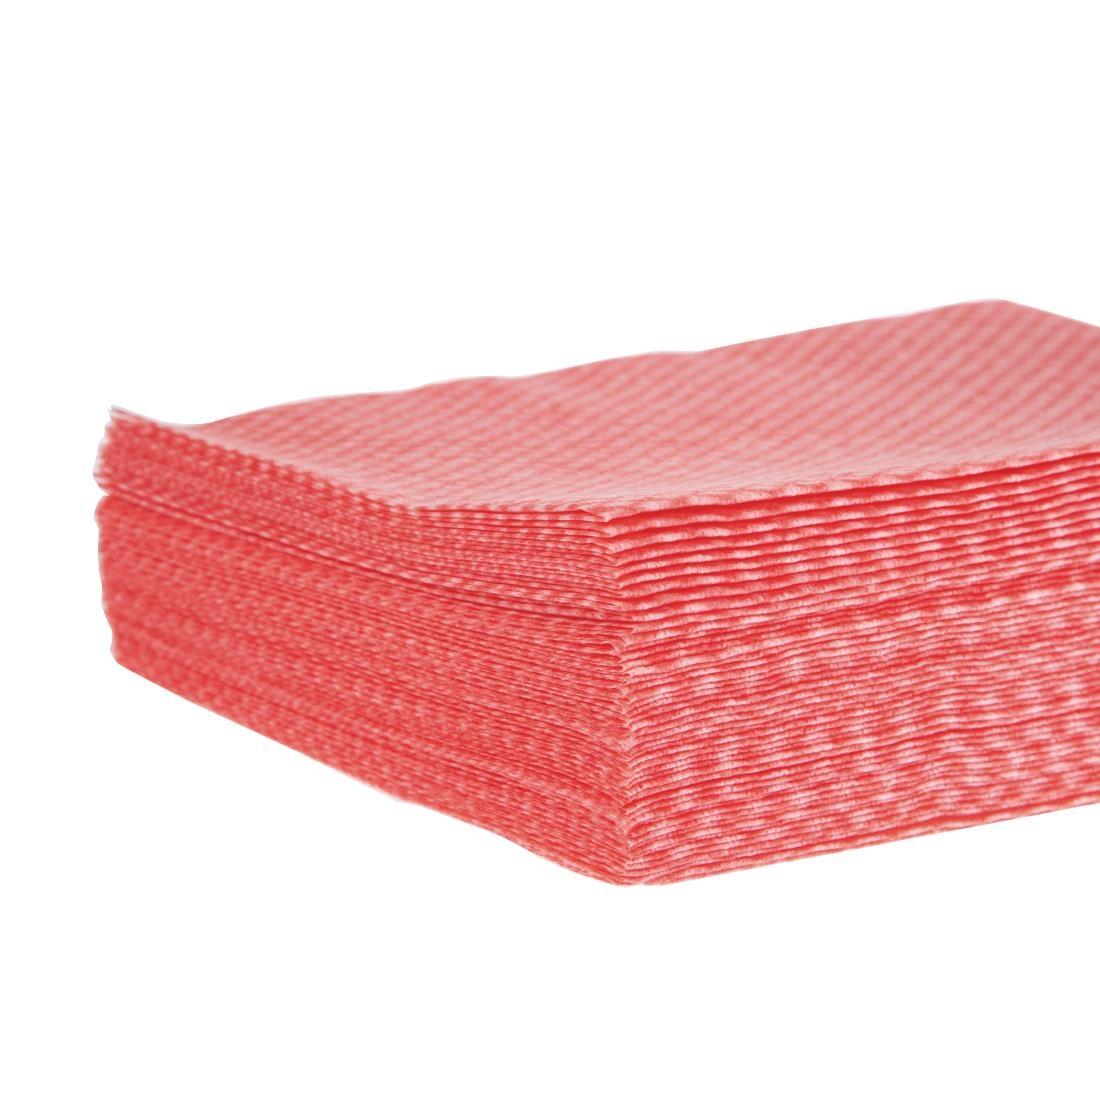 Jantex Solonet Cloths Red (Pack of 50) - CD809  - 3